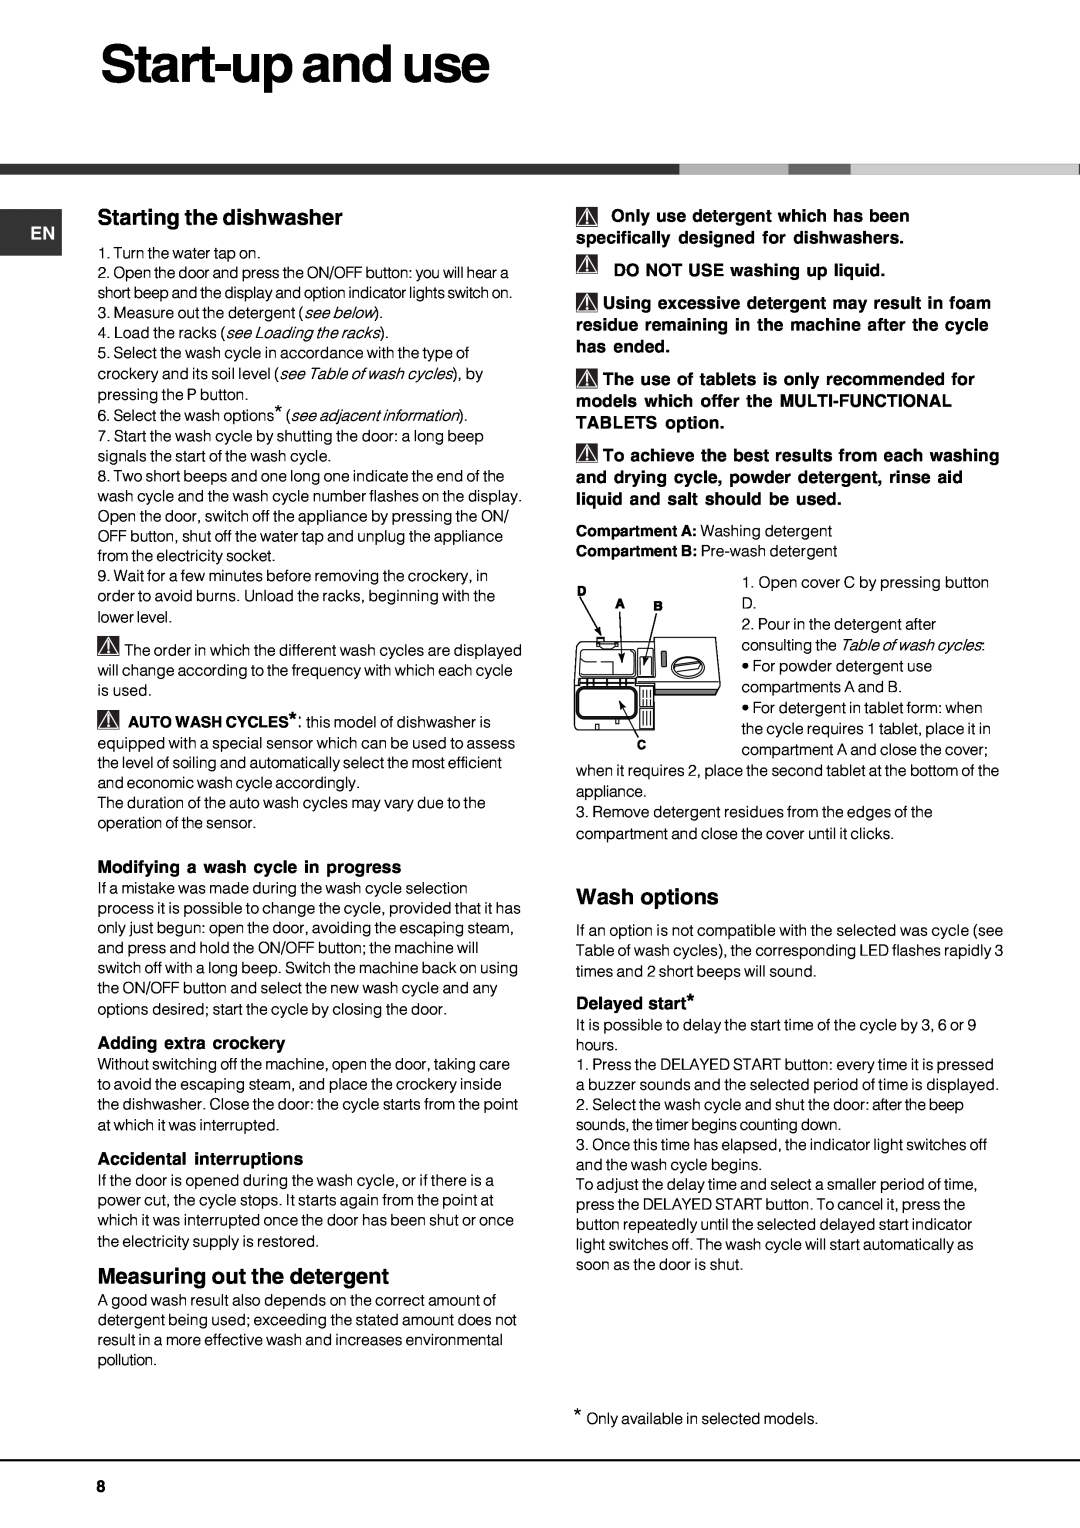 Hotpoint LFT 228 manual Start-upand use, Starting the dishwasher, Measuring out the detergent, Wash options 